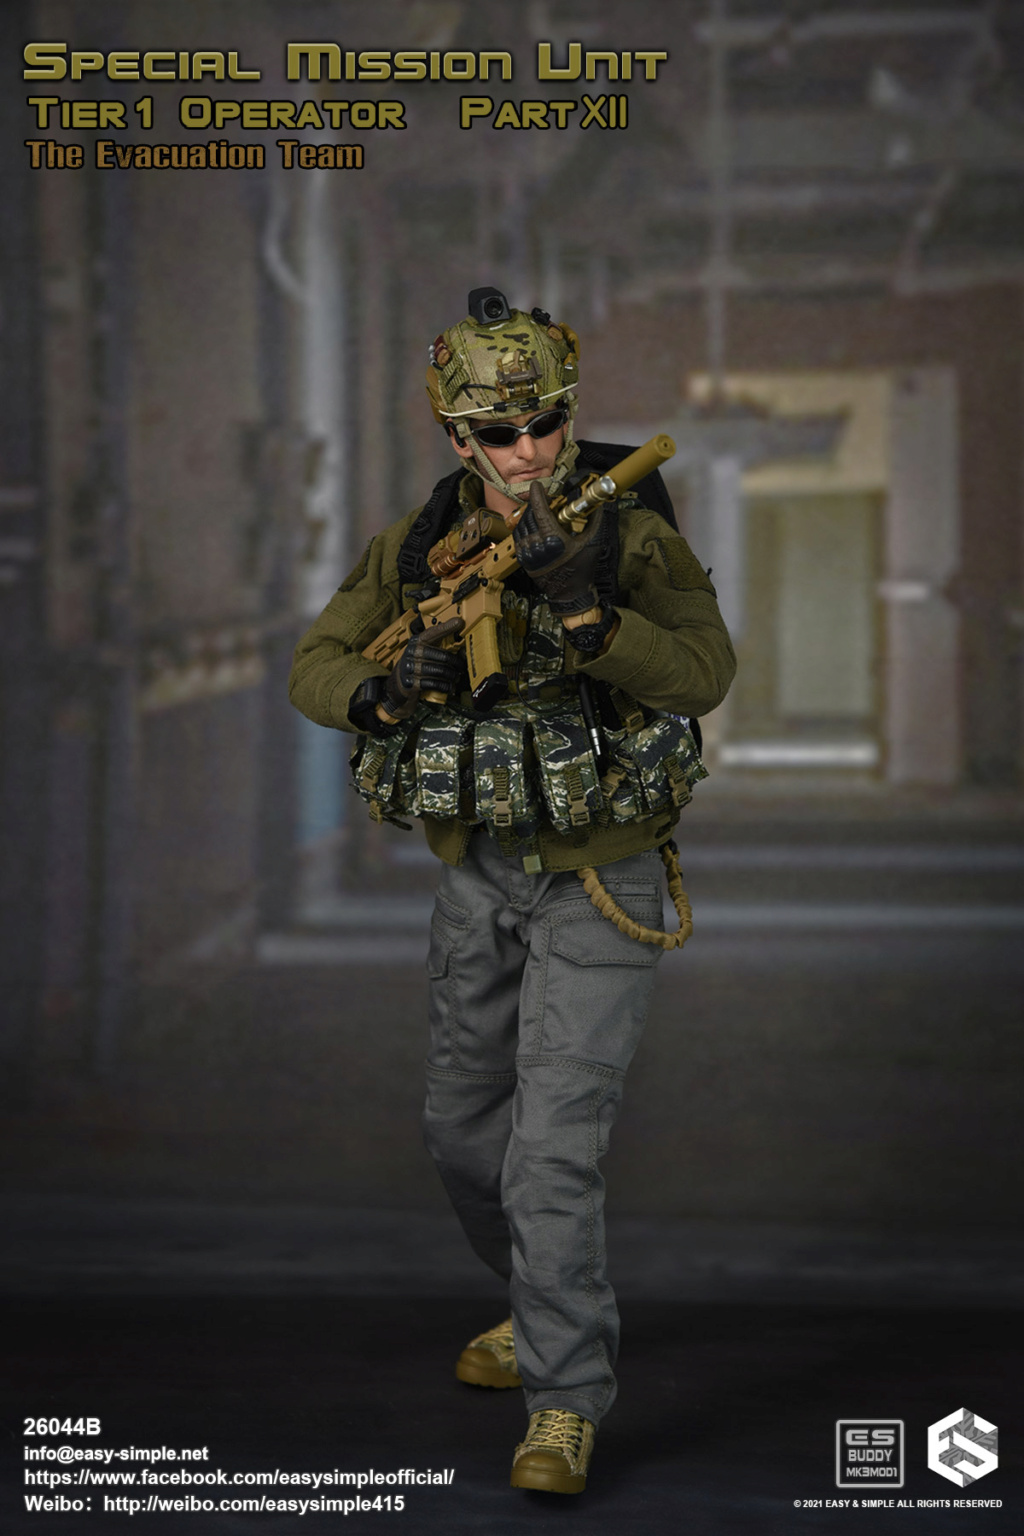 Tier1Operator - NEW PRODUCT: Easy&Simple: 26044B Special Mission Unit Tier1 Operator Part XII The Evacuation Team 940a2210